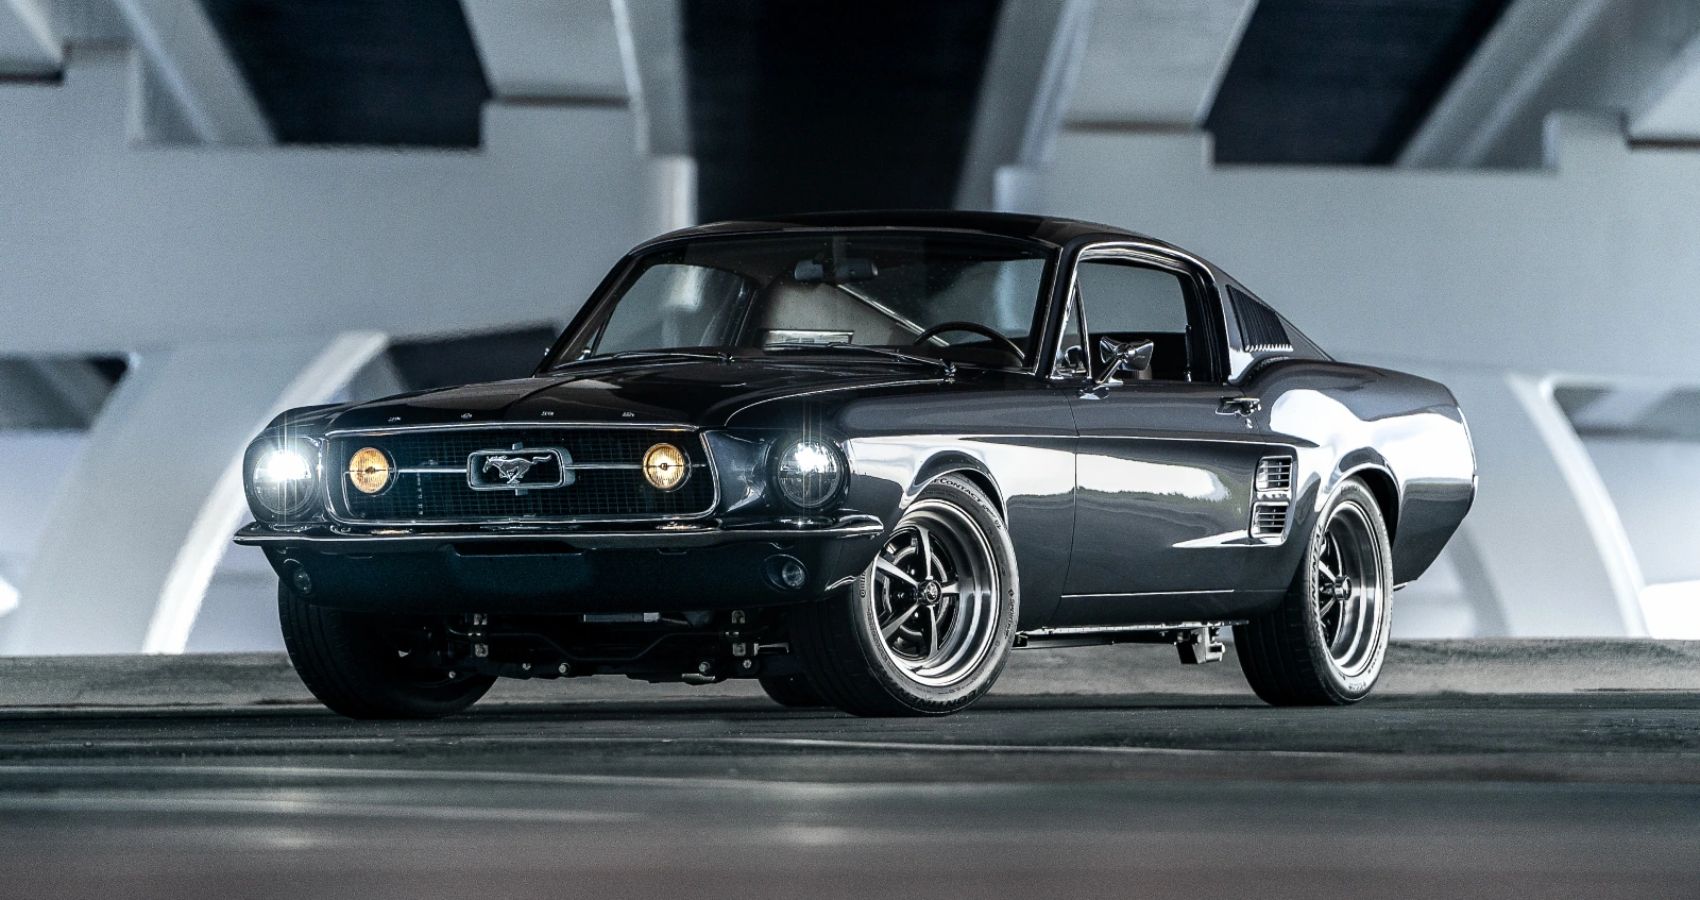 This Amazing 460-HP 1967 Mustang Fastback Restomod Will Quicken Your ...